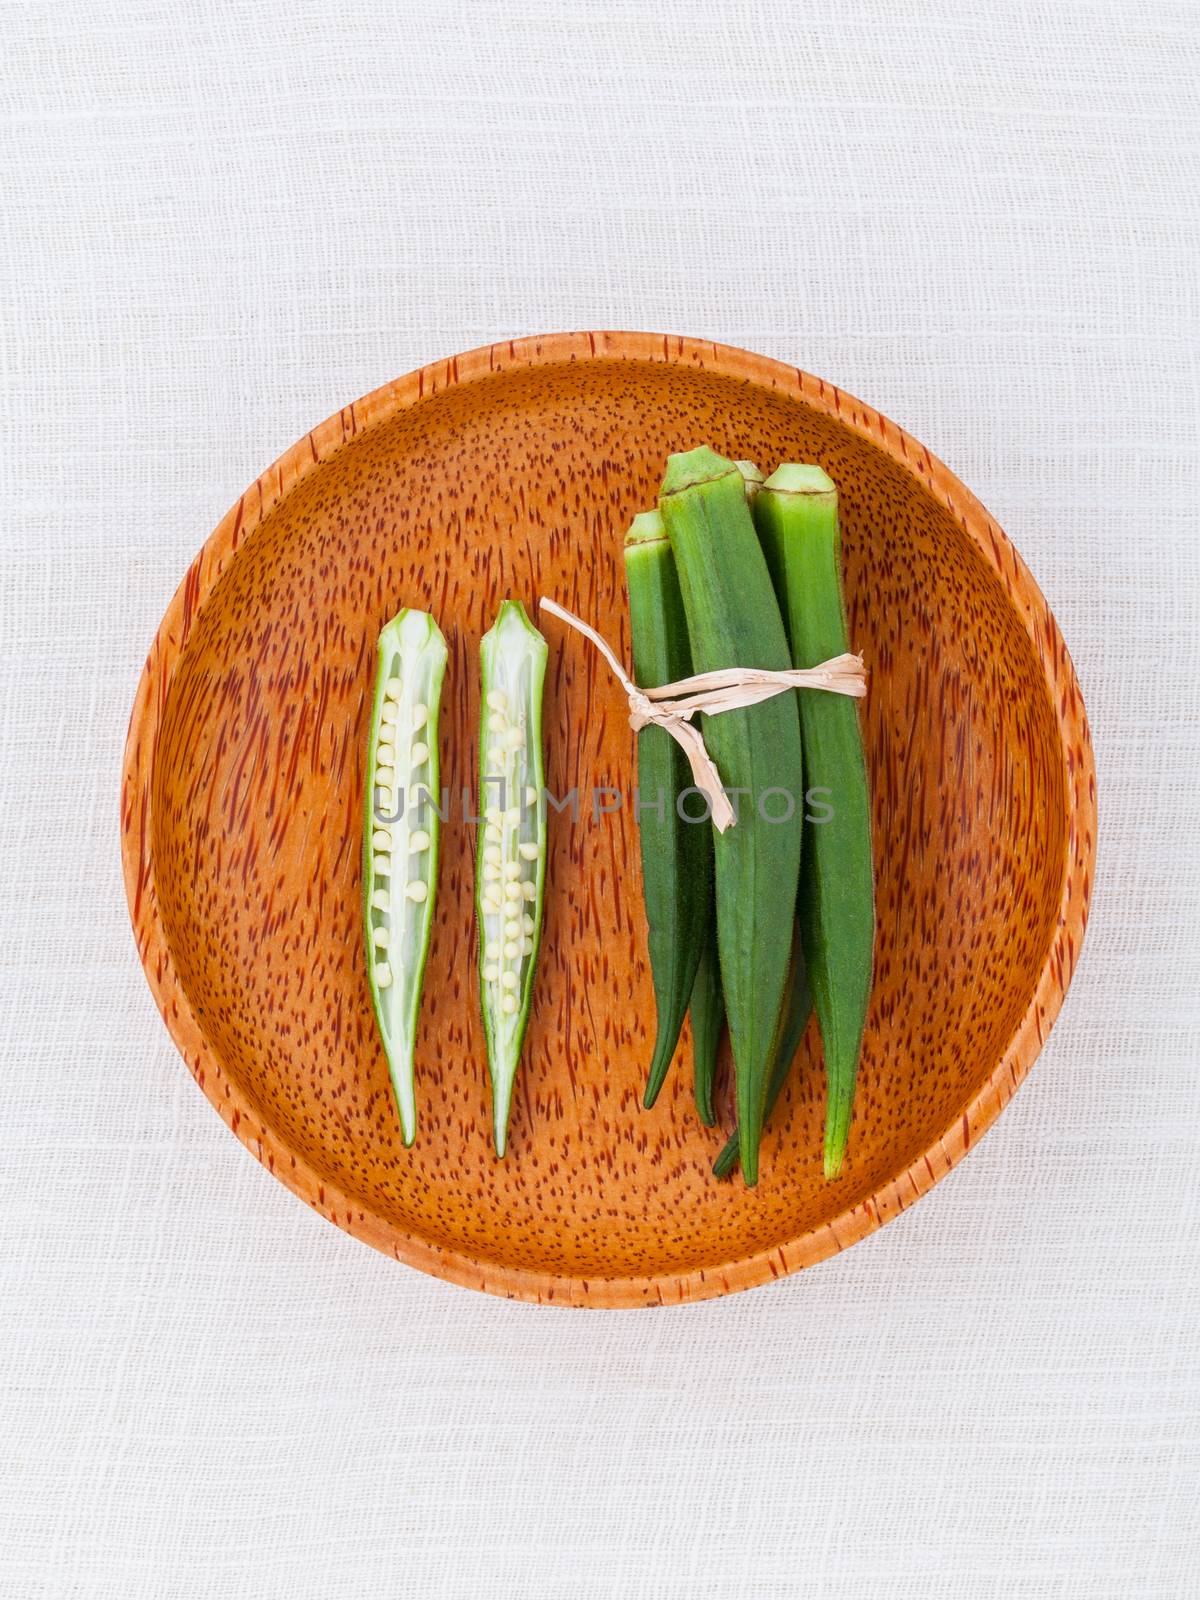 Lady 's Fingers or Okra clean and healthy food on white table .